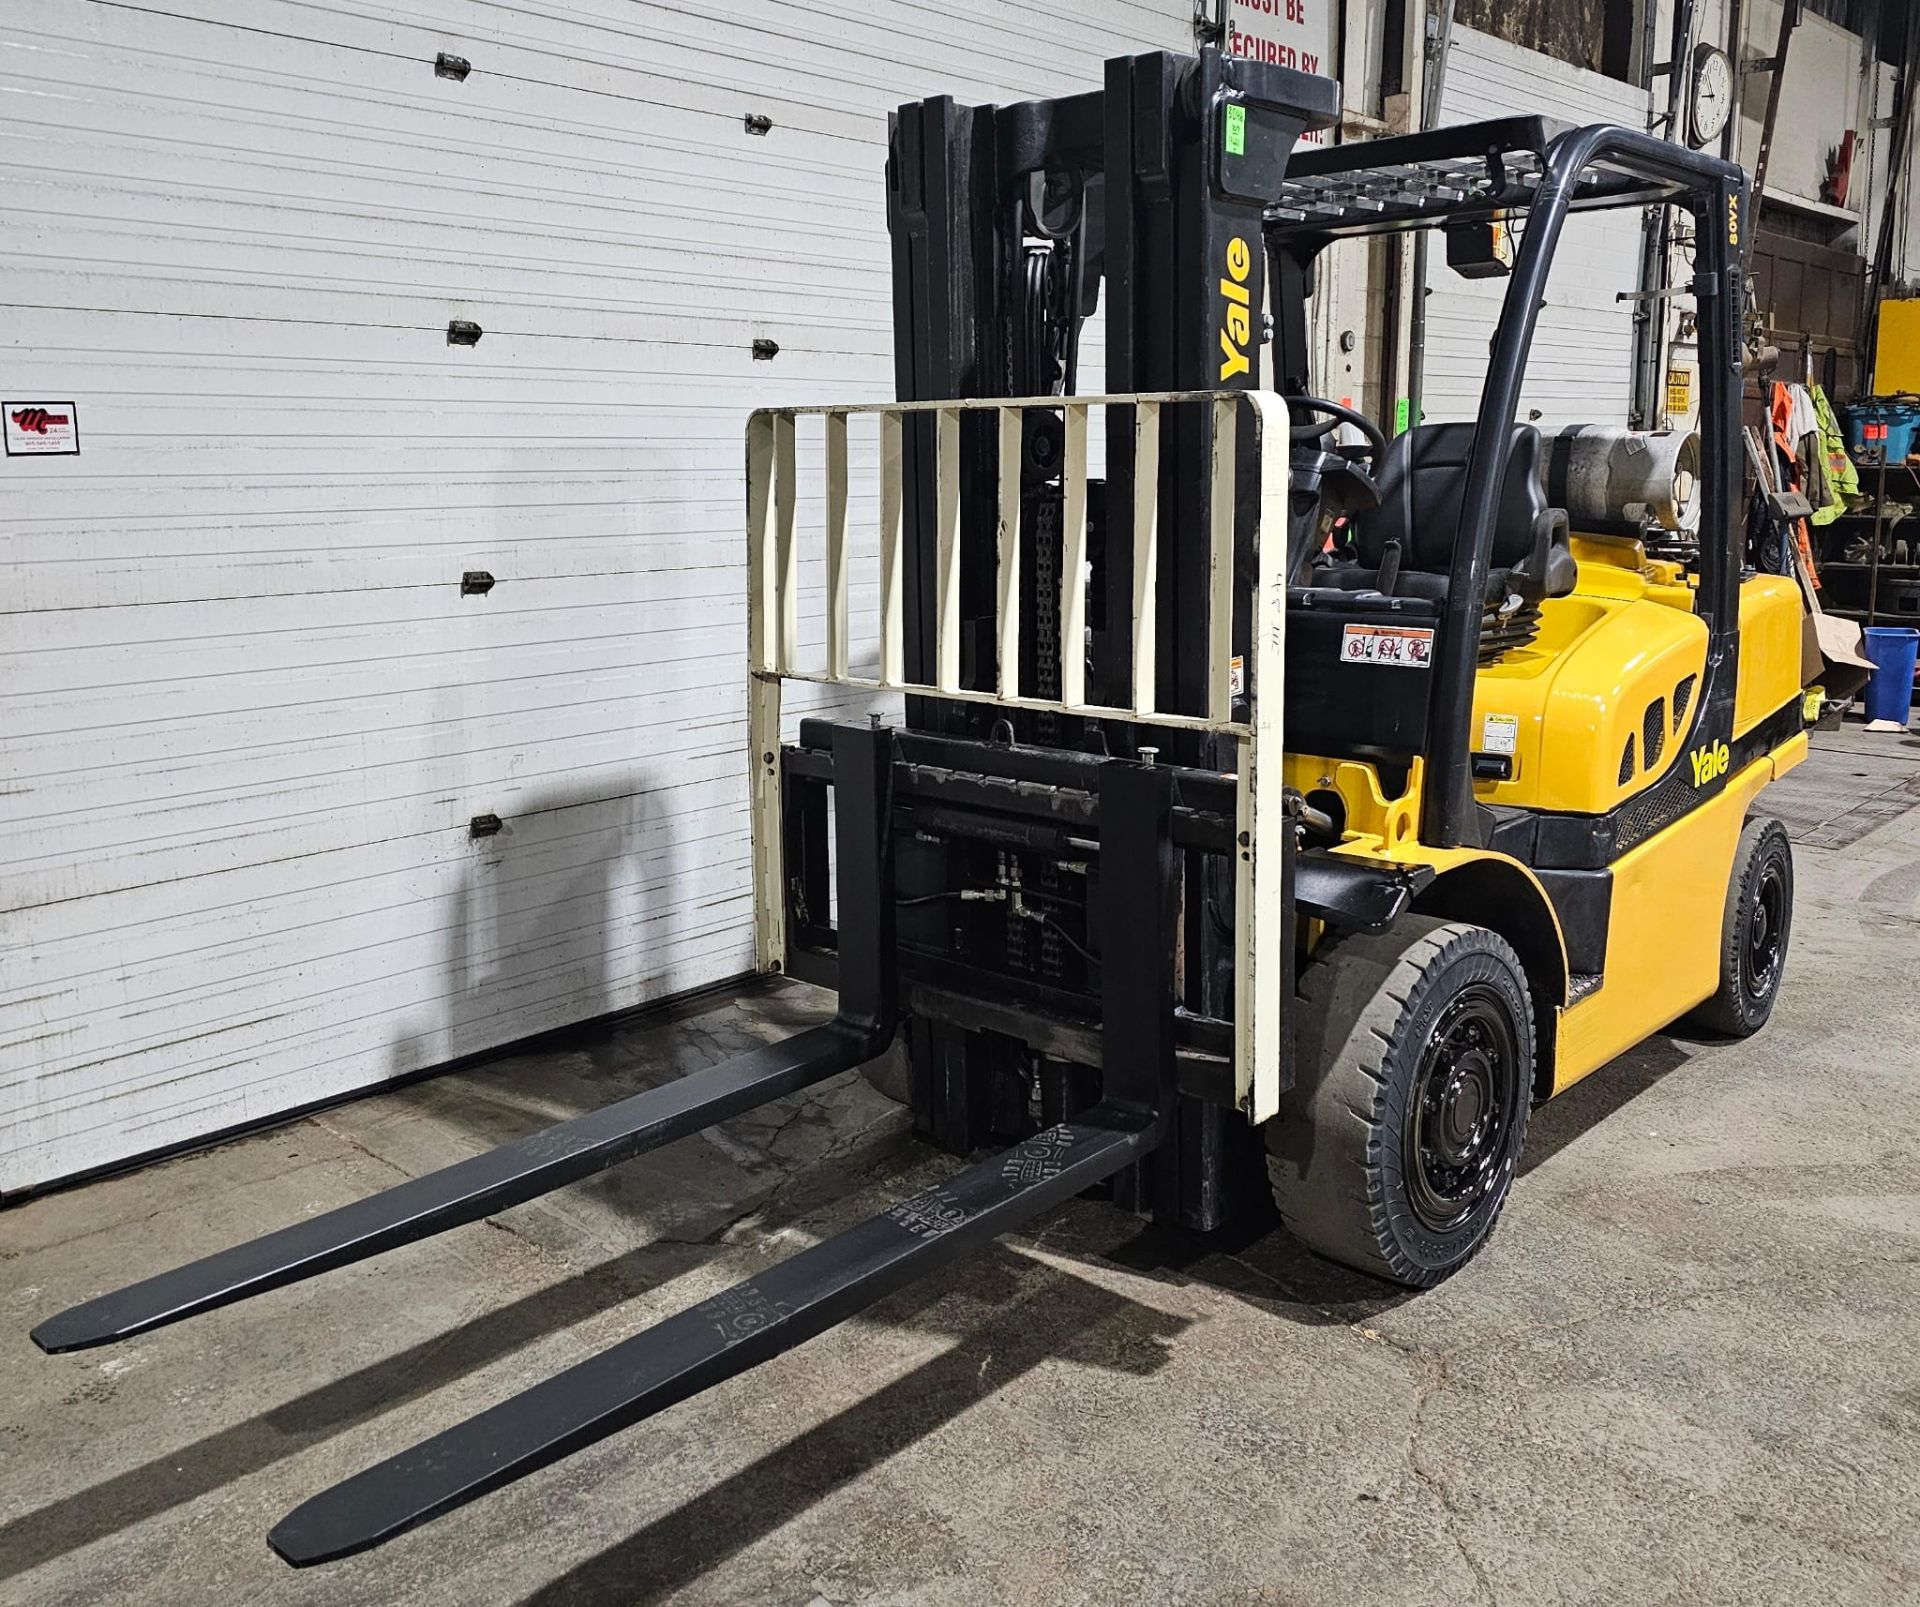 2017 Yale 8,000lbs Capacity OUTDOOR Forklift LPG (Propane) with Sideshift and 3-STAGE MAST - Image 4 of 5